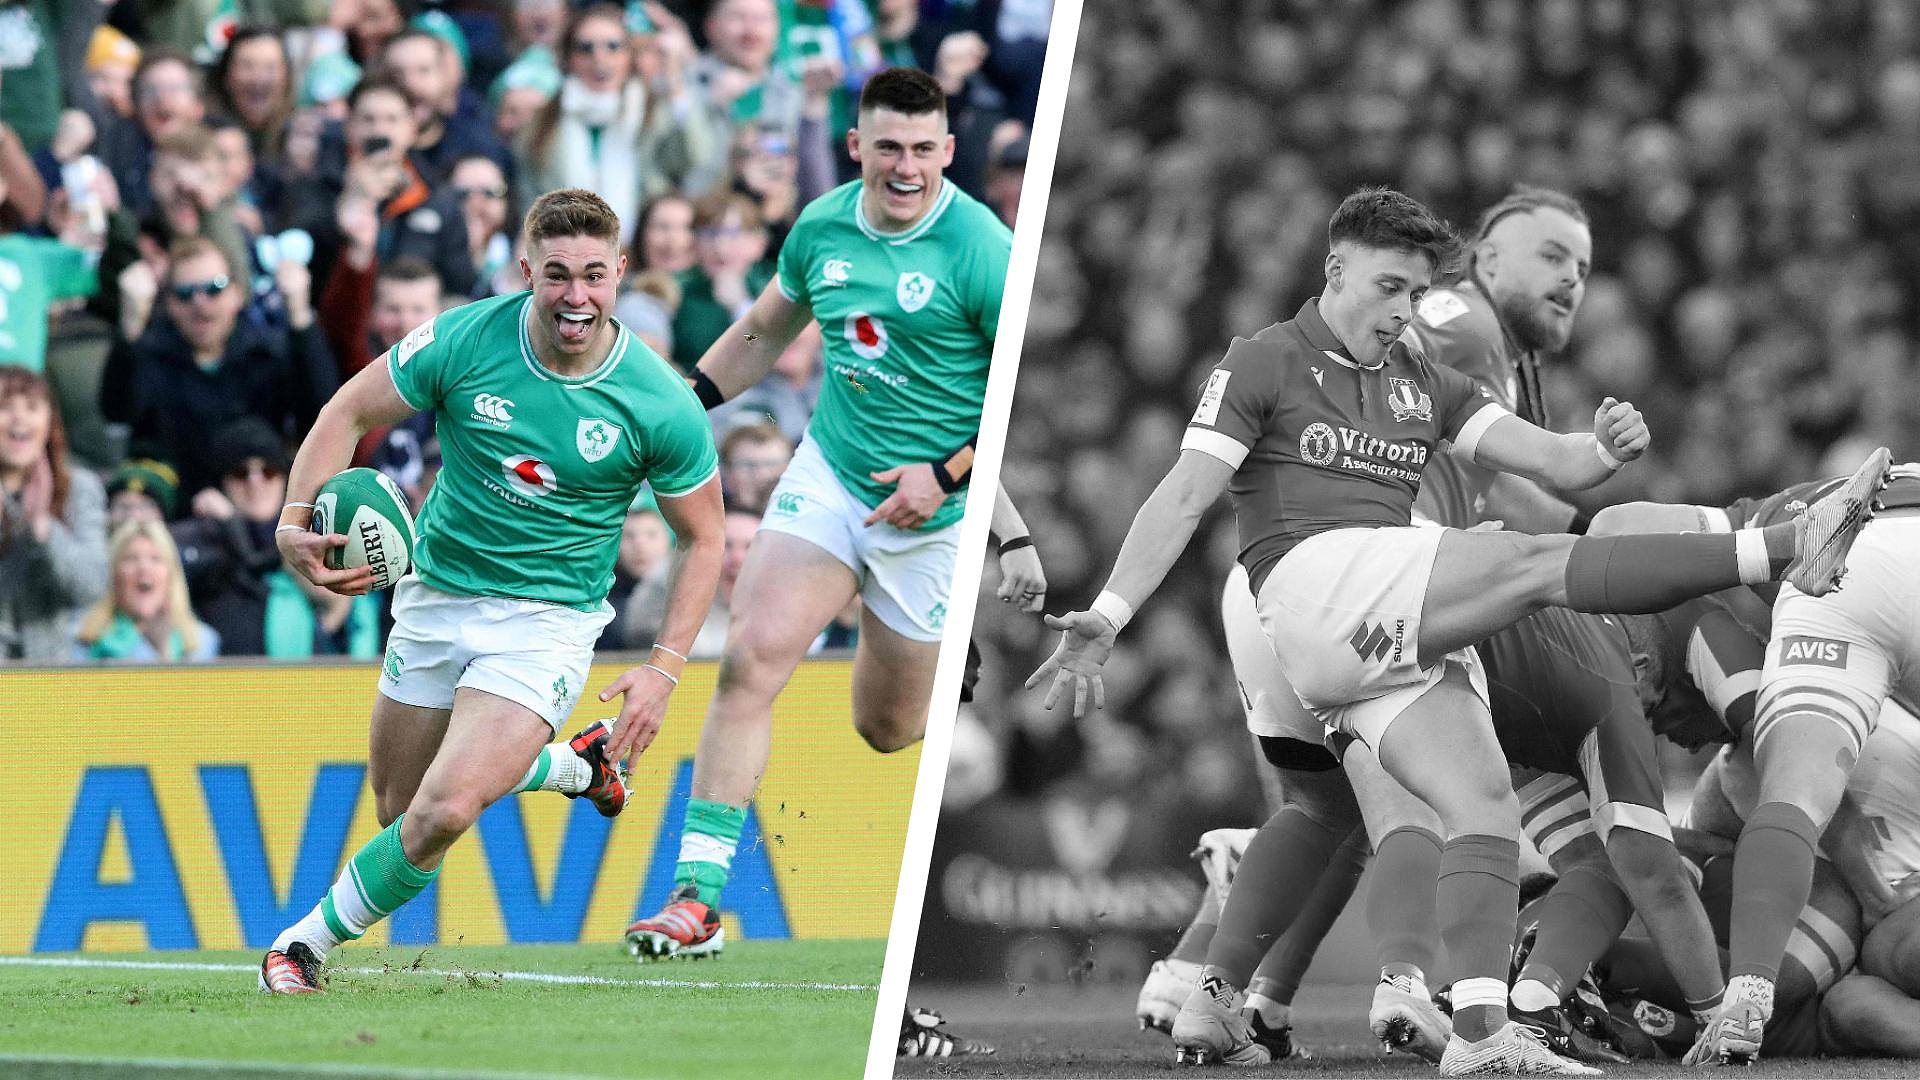 Ireland-Italy: Crowley confirmation, Varney falls back into his faults... Tops and flops